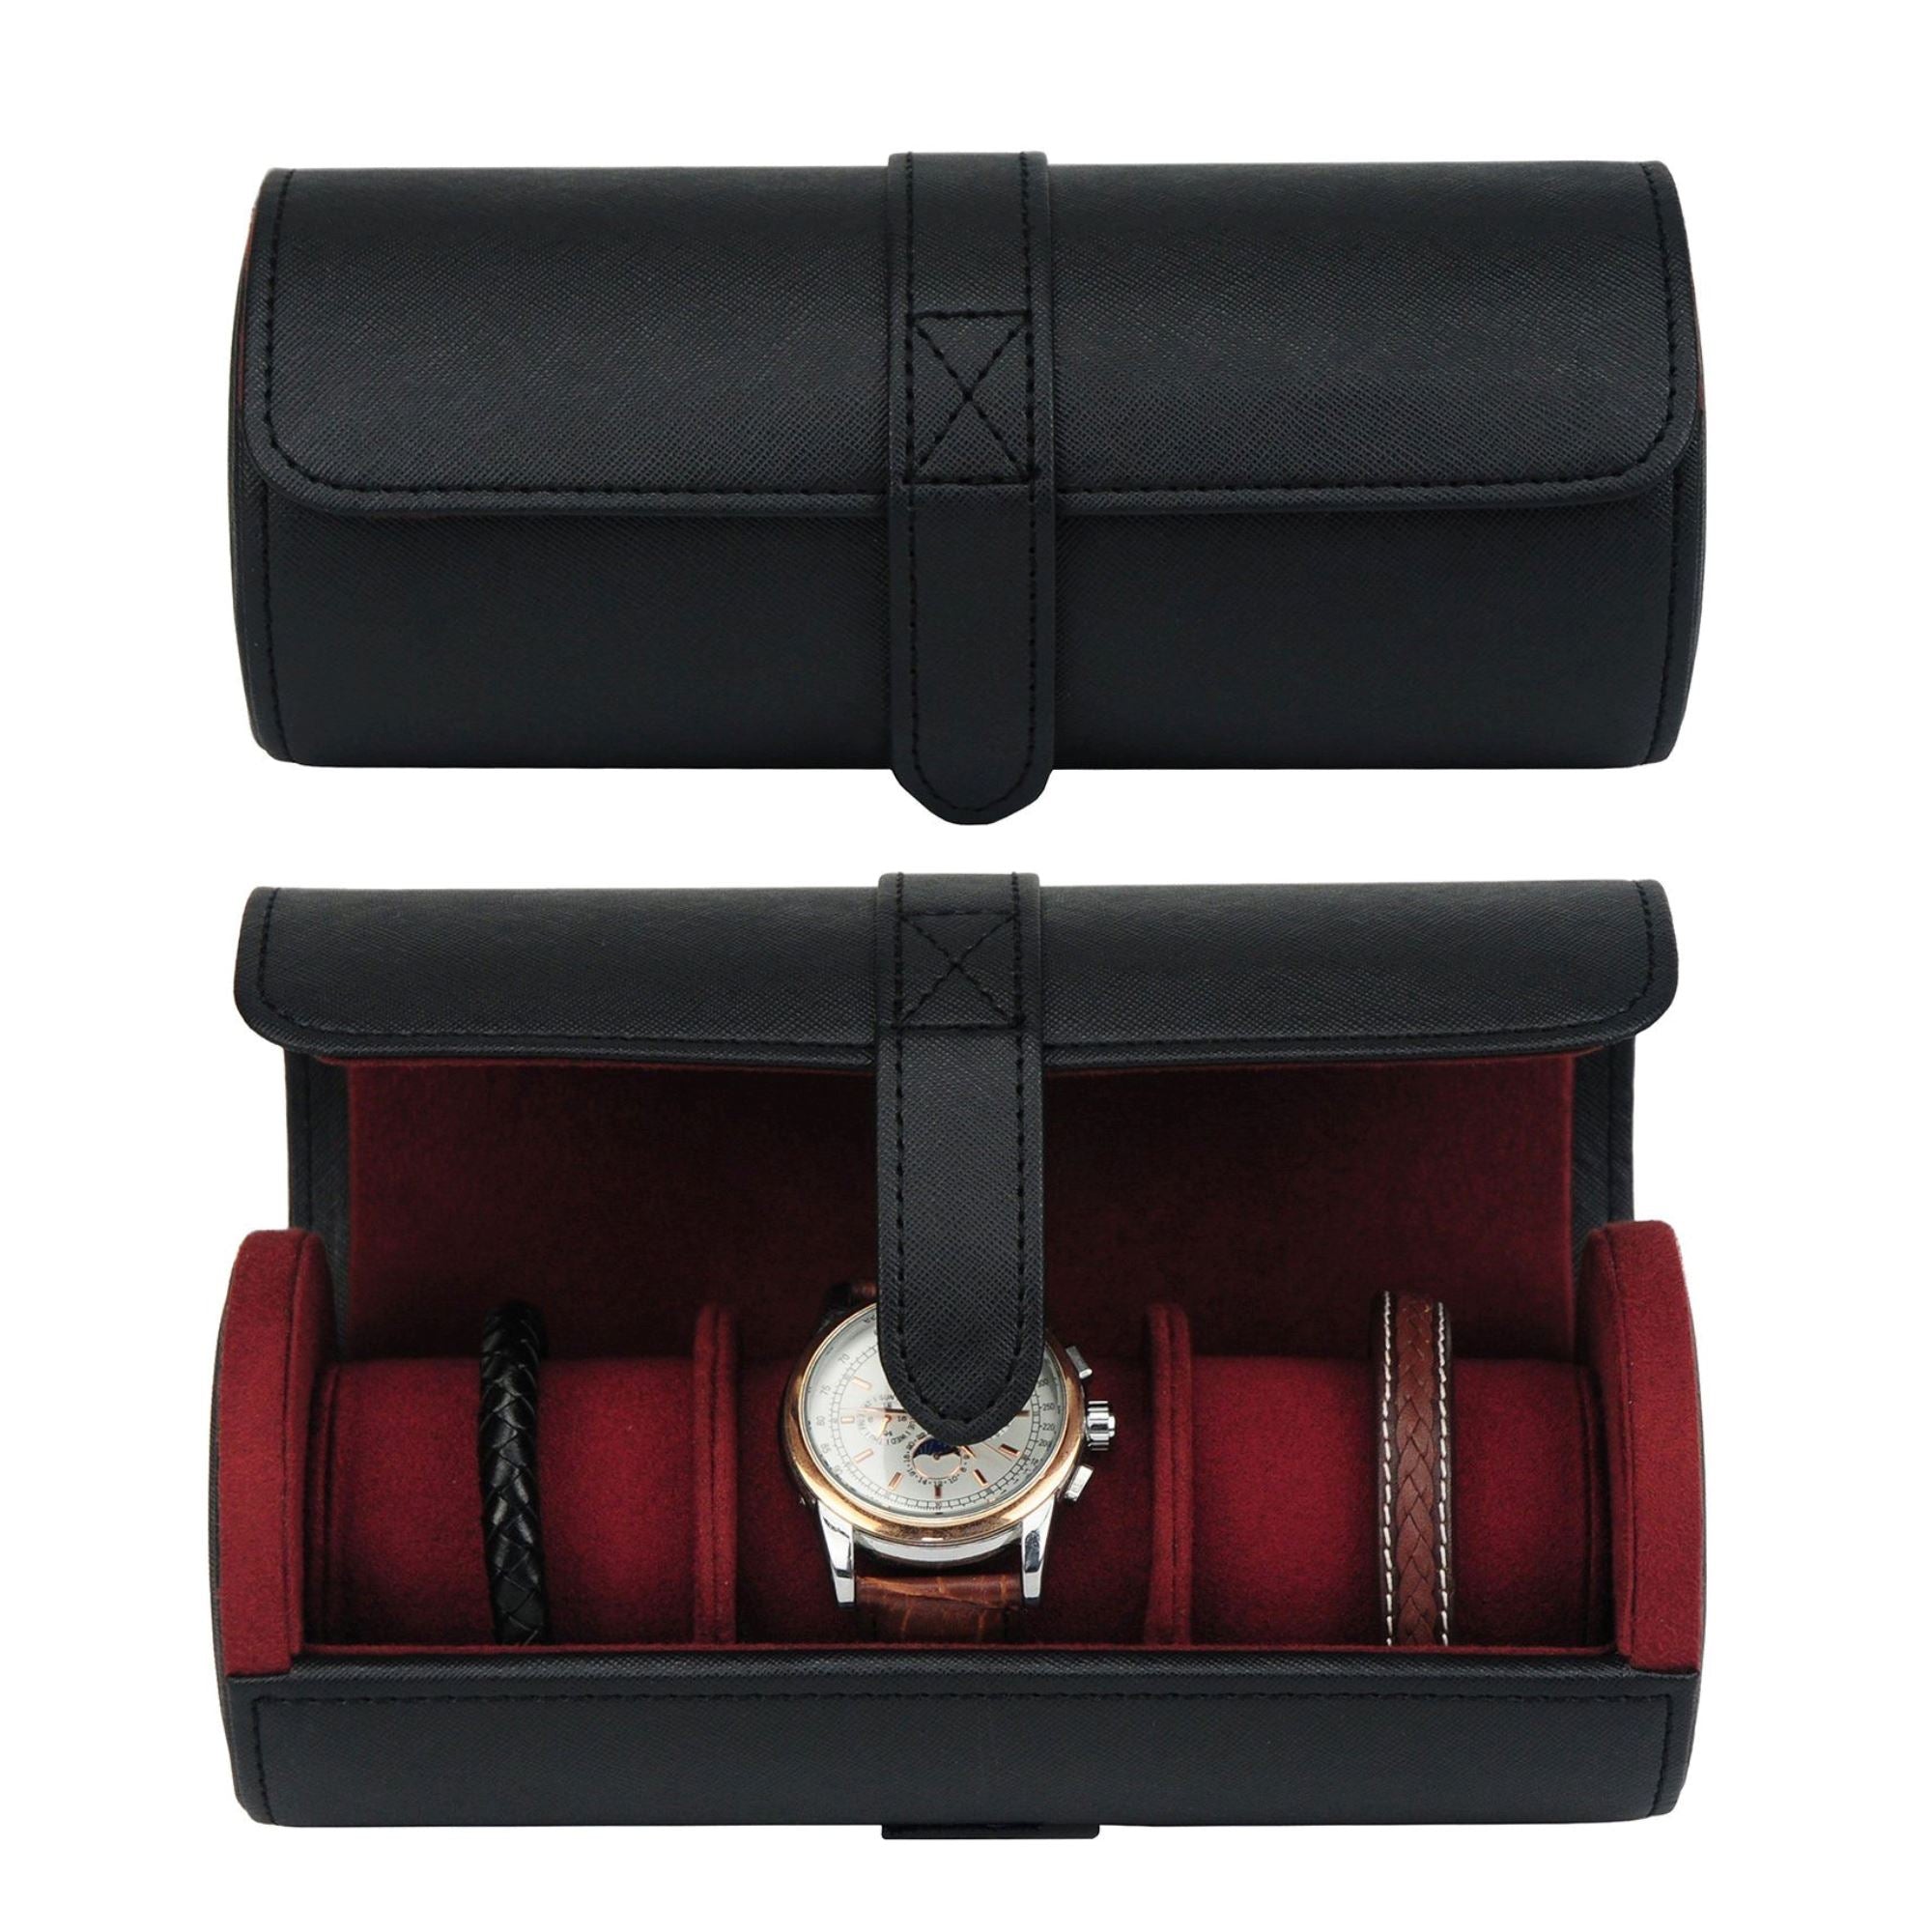 Watch Roll Case for 3 in Black Vegan Leather Watch Boxes Clinks 